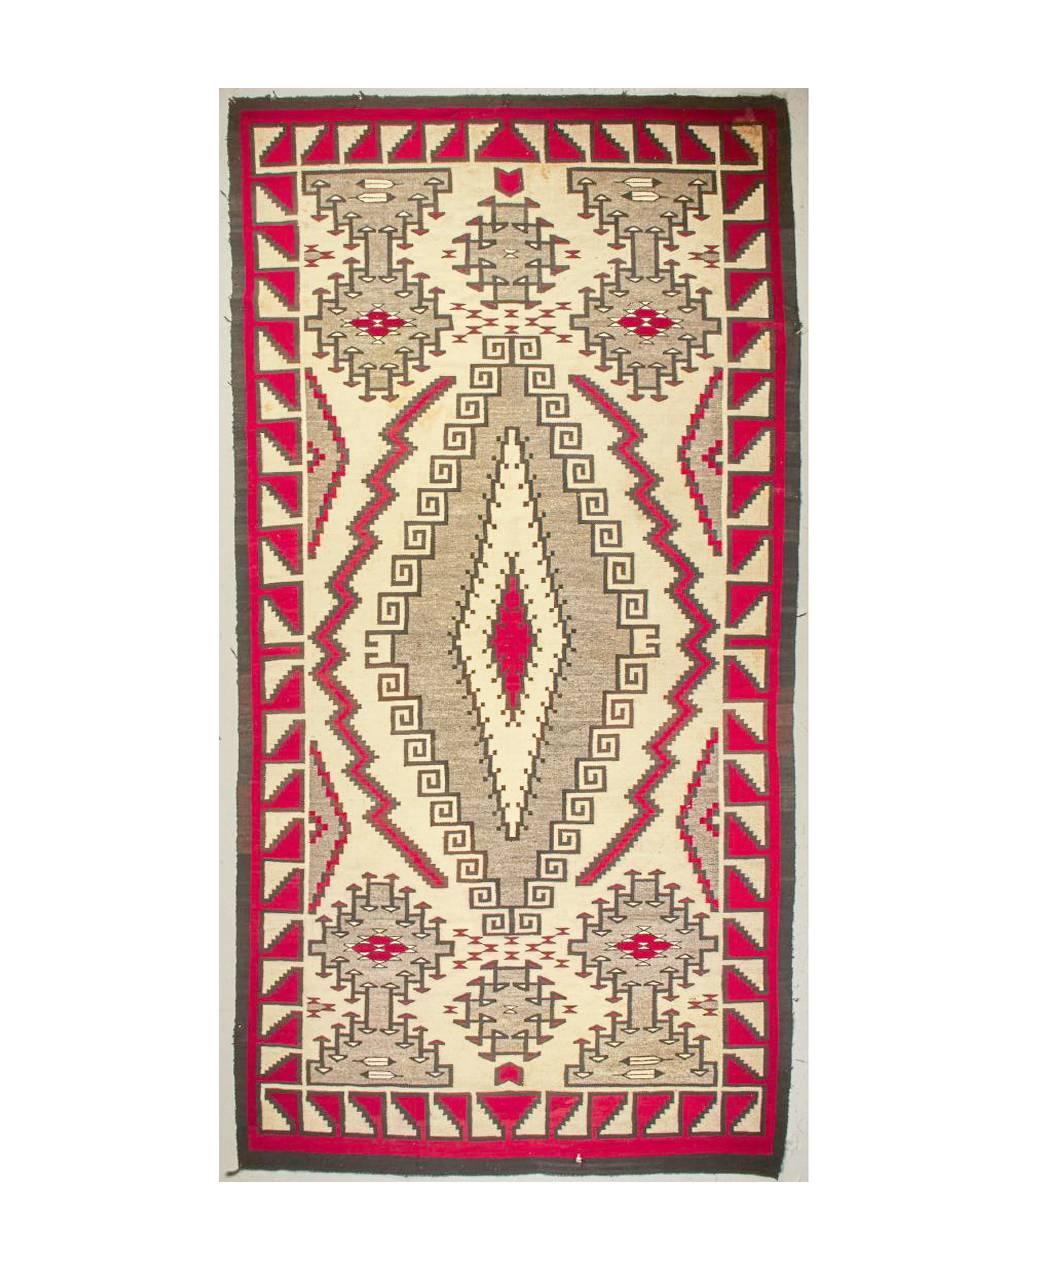 On offer is a rare antique Navajo rug, a truly magnificent piece of textile, circa 1920s-1930s. Distinguished in its massive size (68 by 131 inches), intricate designs and superb workmanship, this Klagetoh weaving is rather unusual in that instead